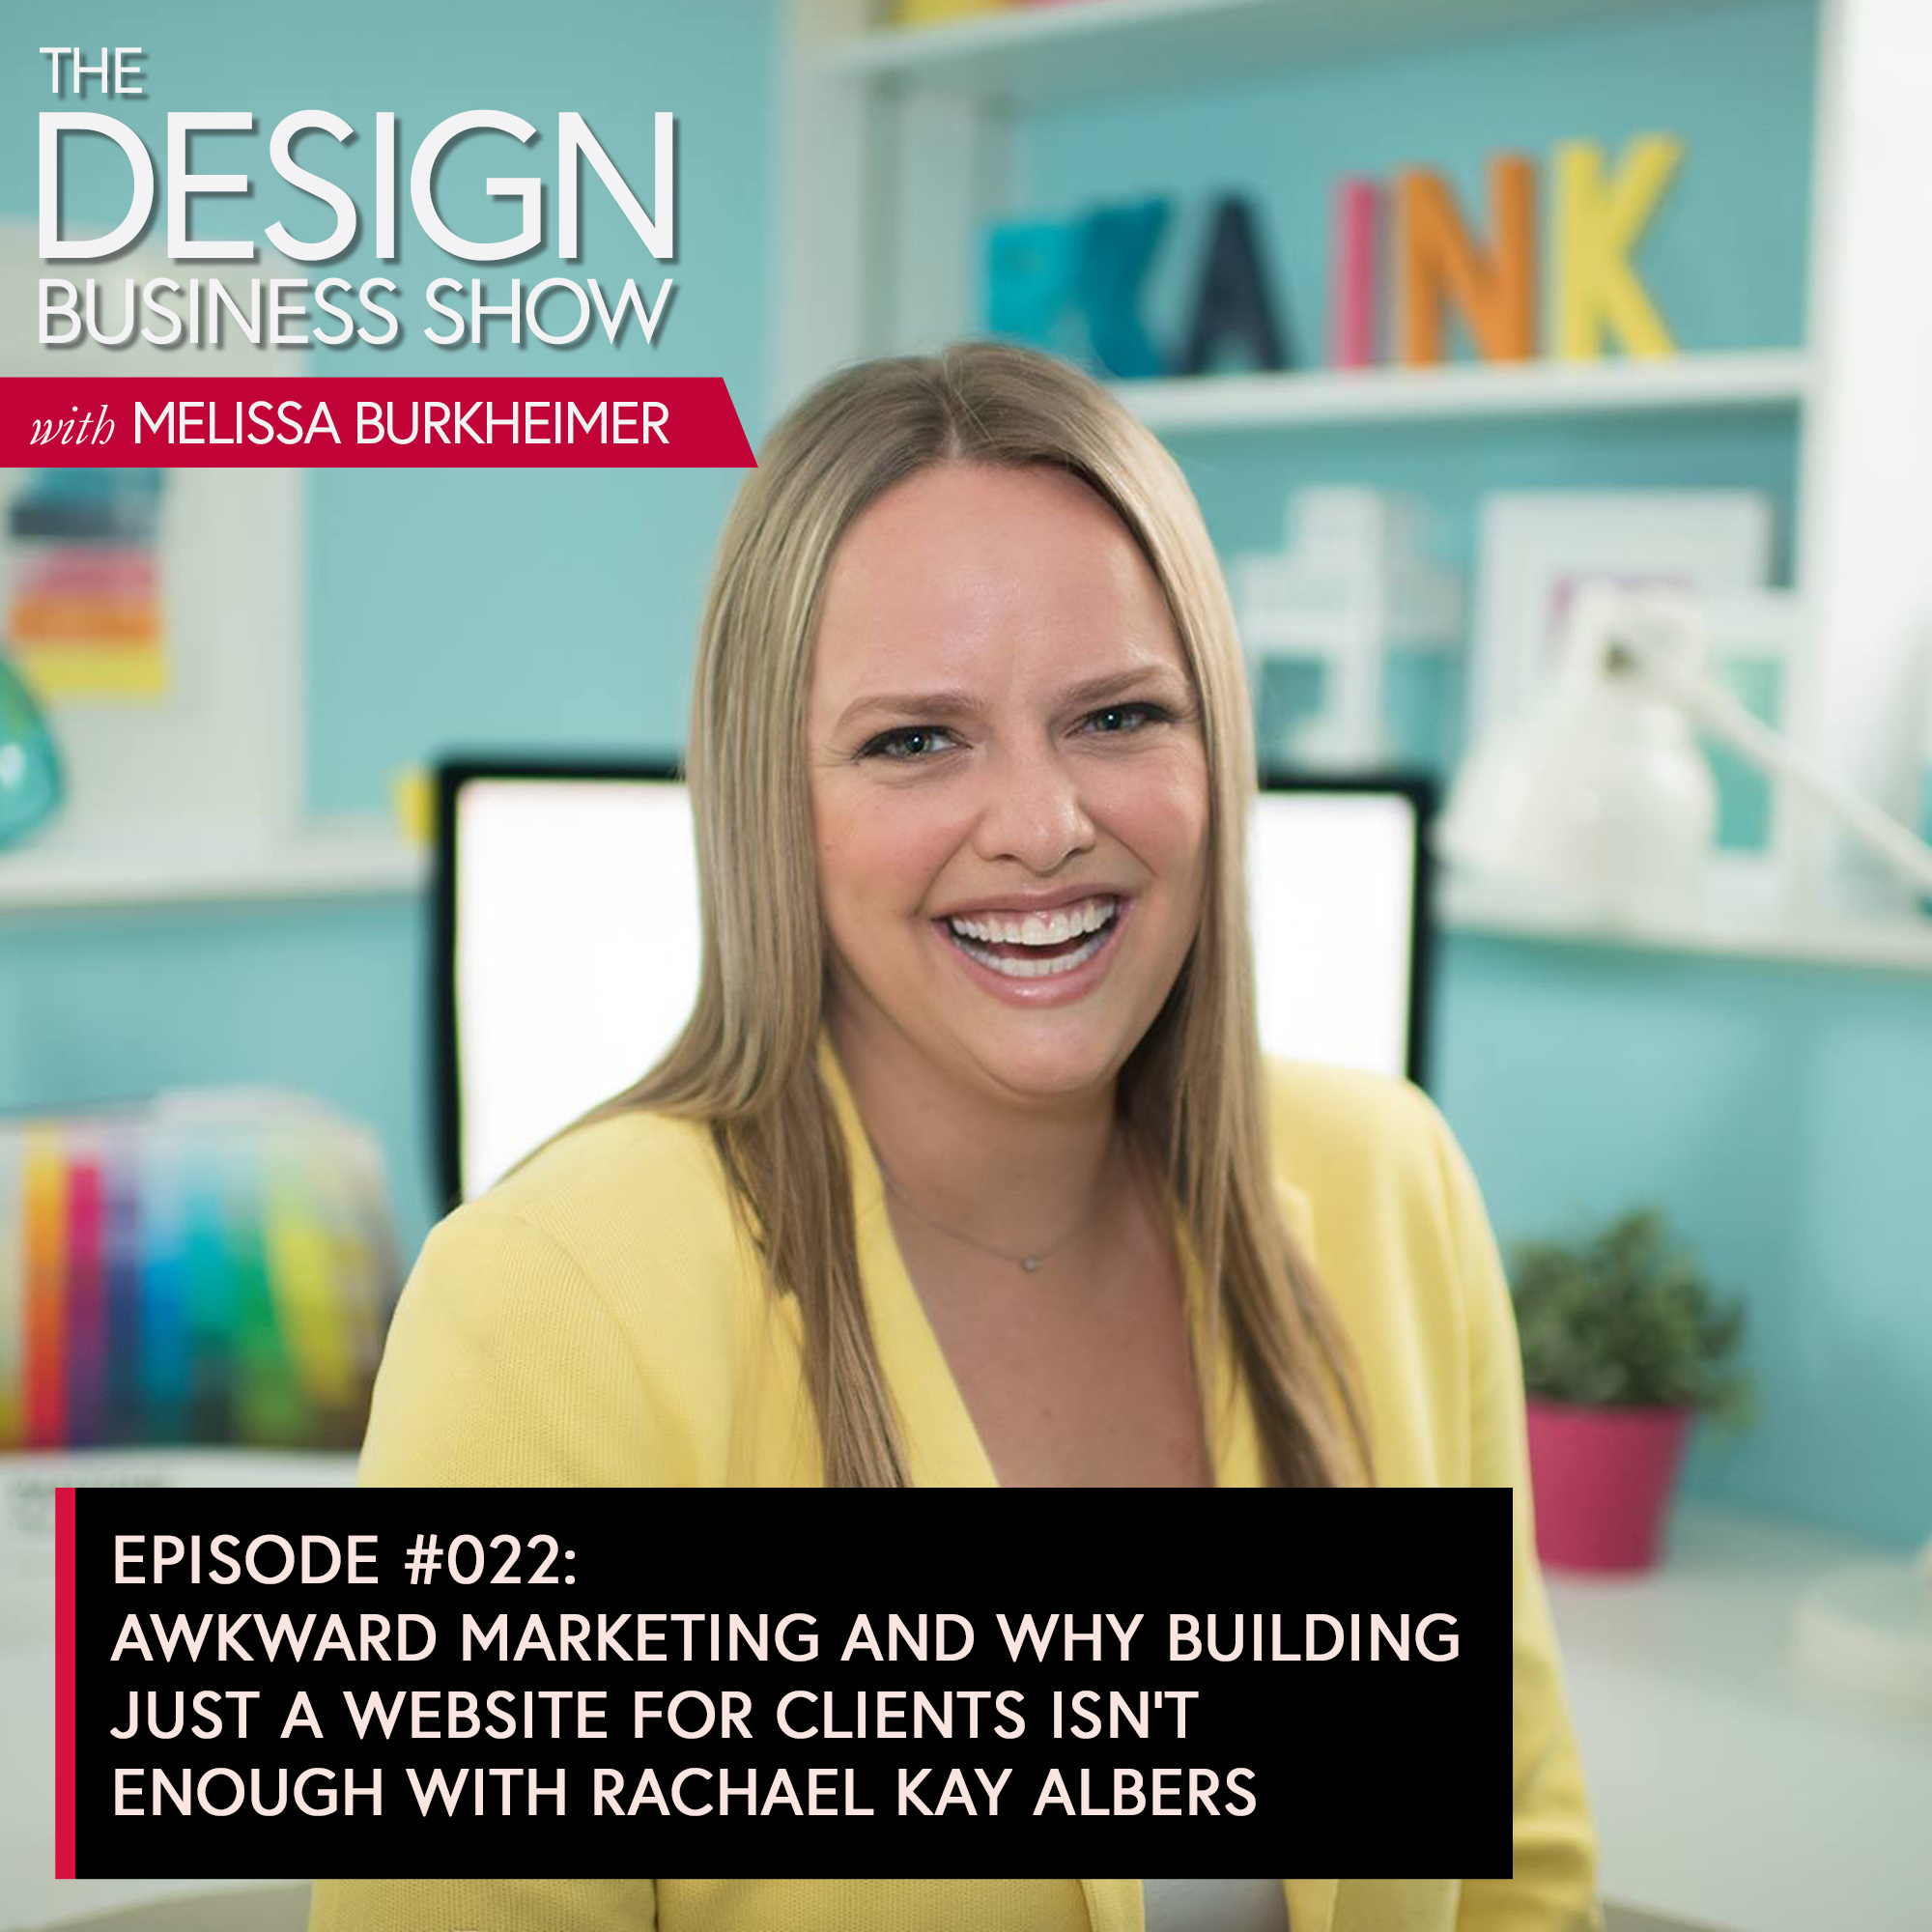 Rachael Kay Albers is more than a designer. She’s a marketing genius who got so fed up with all of the awkward marketing strategies being taught out there, she created a Biz Comedy Show called Awkward Marketing. Learn why building a website isn’t enough, the launch of her new course, and all about her sweet baby girl!